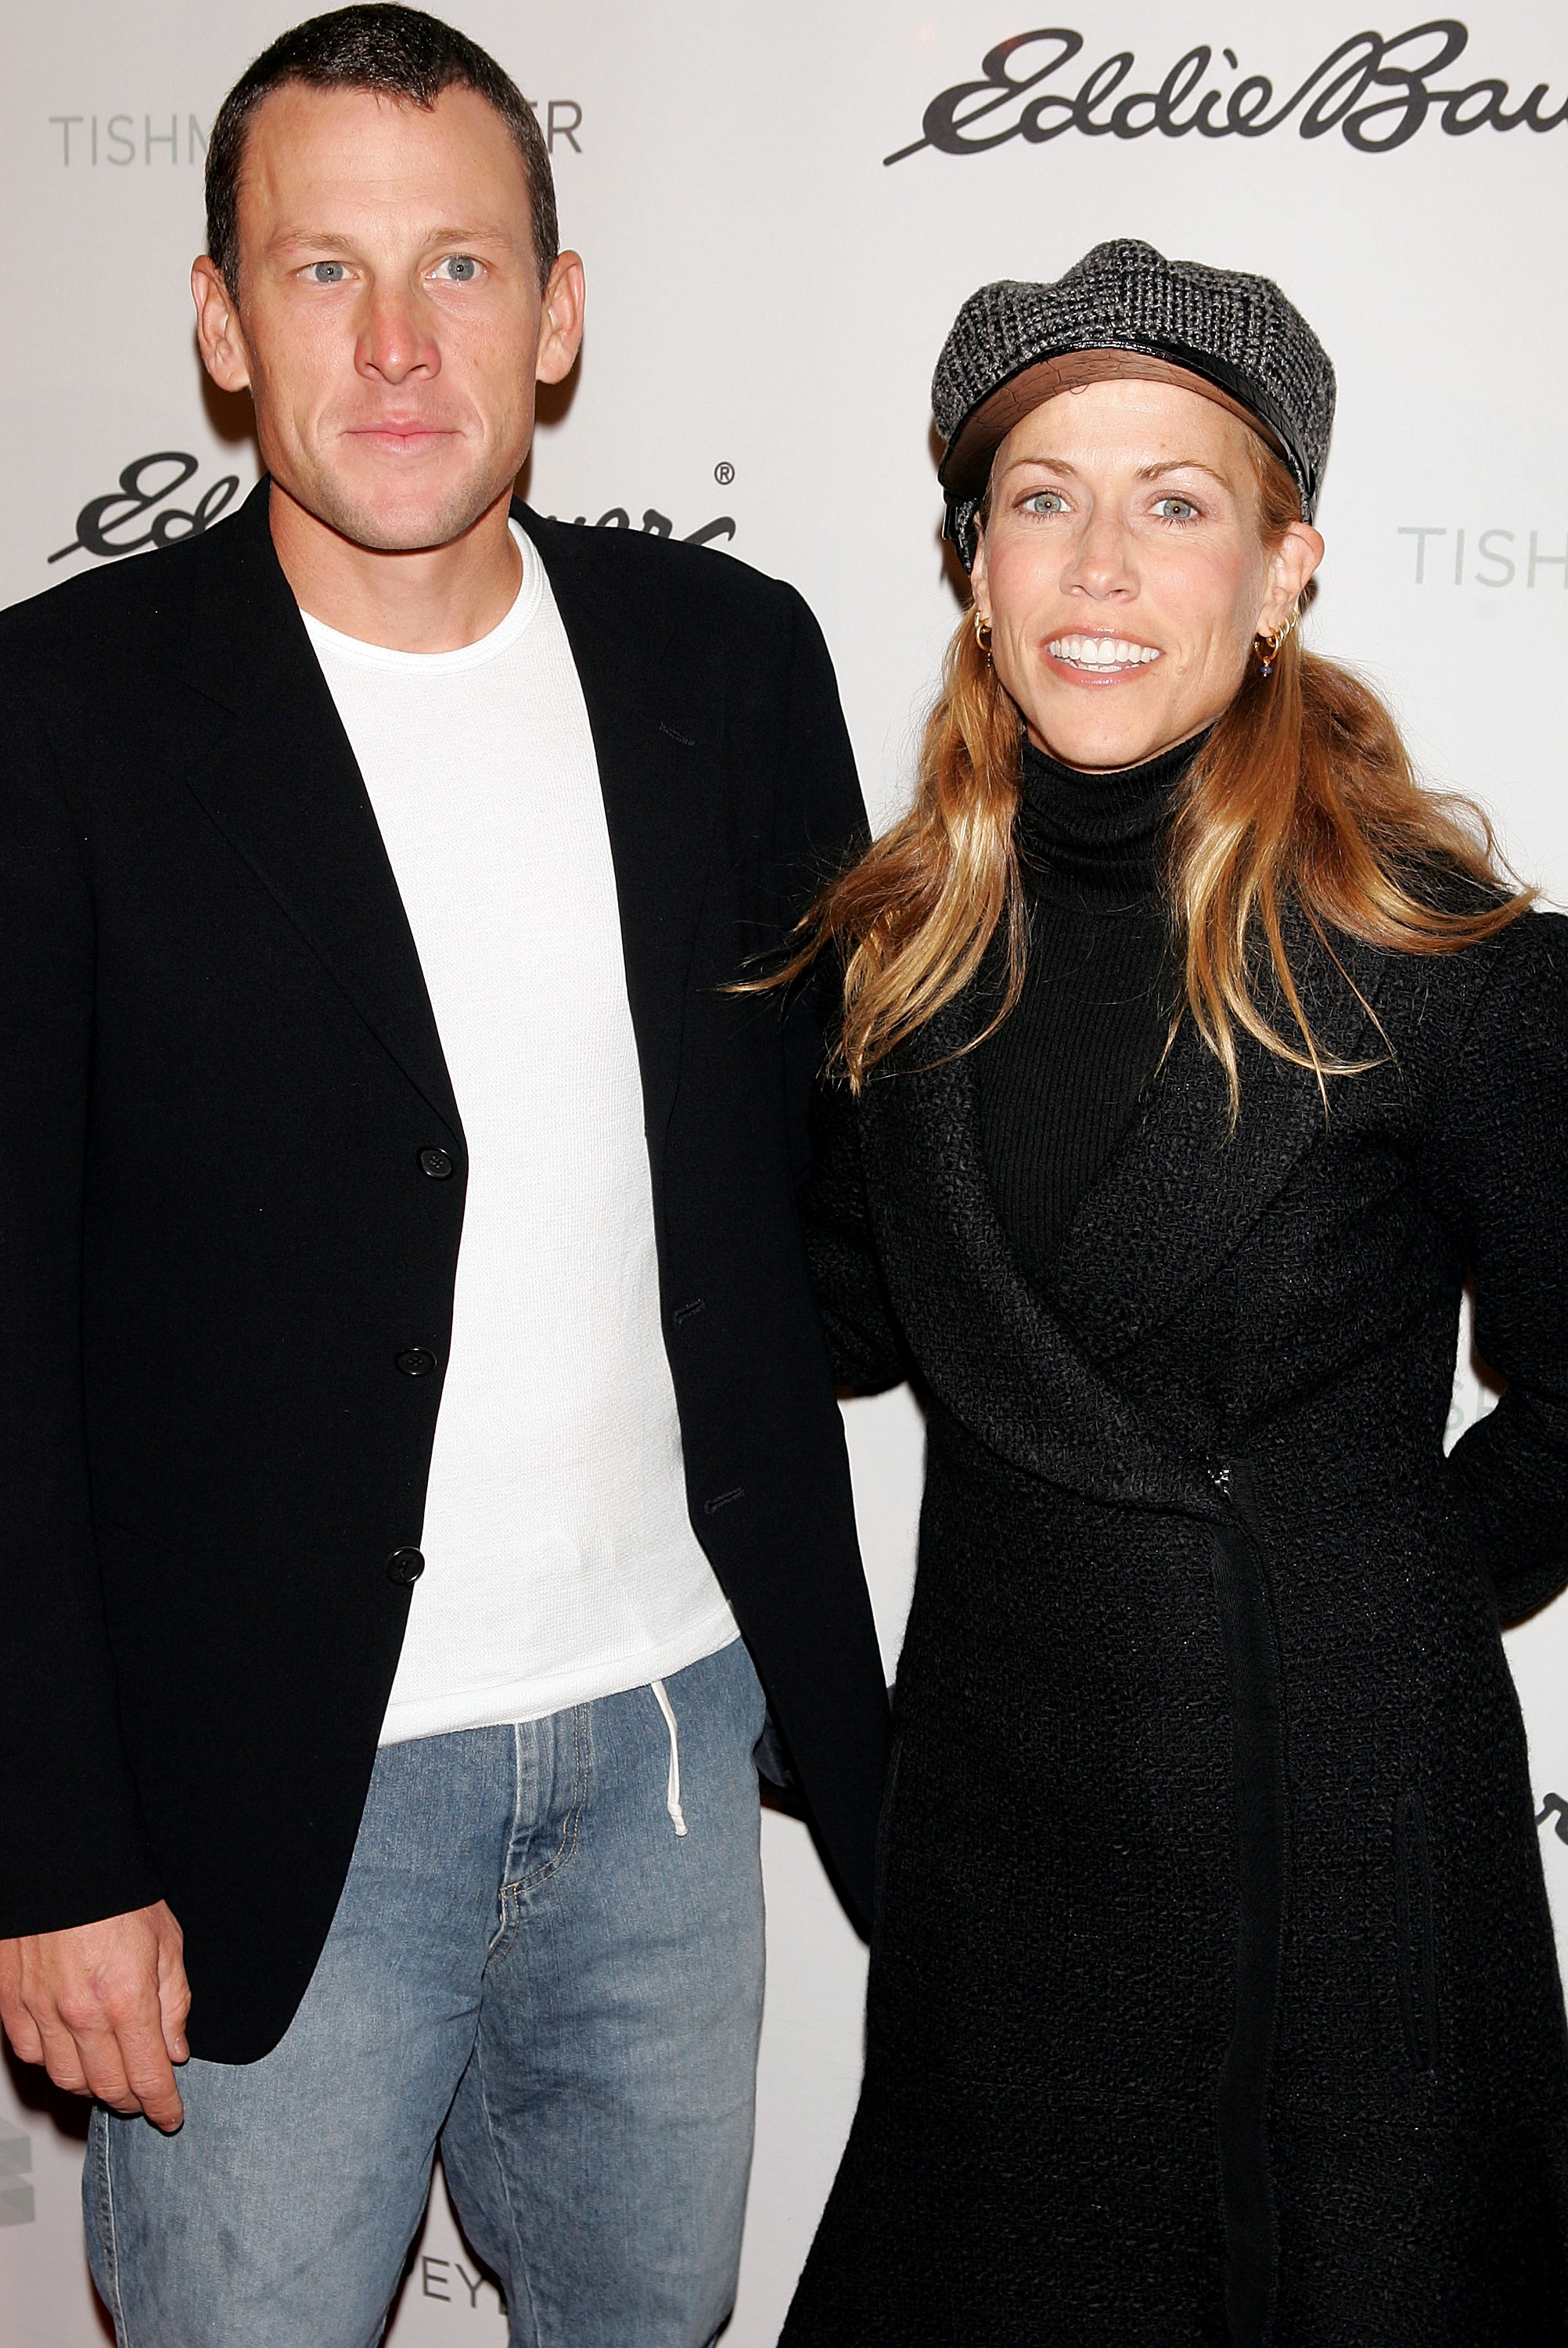 NEW YORK - OCTOBER 20:  Musician Sheryl Crow and fiance cyclist Lance Armstrong arrive at the opening night party for the Rockefeller Center Ice Skating Rink on October 20, 2005 in New York City.  (Photo by Scott Gries/Getty Images)